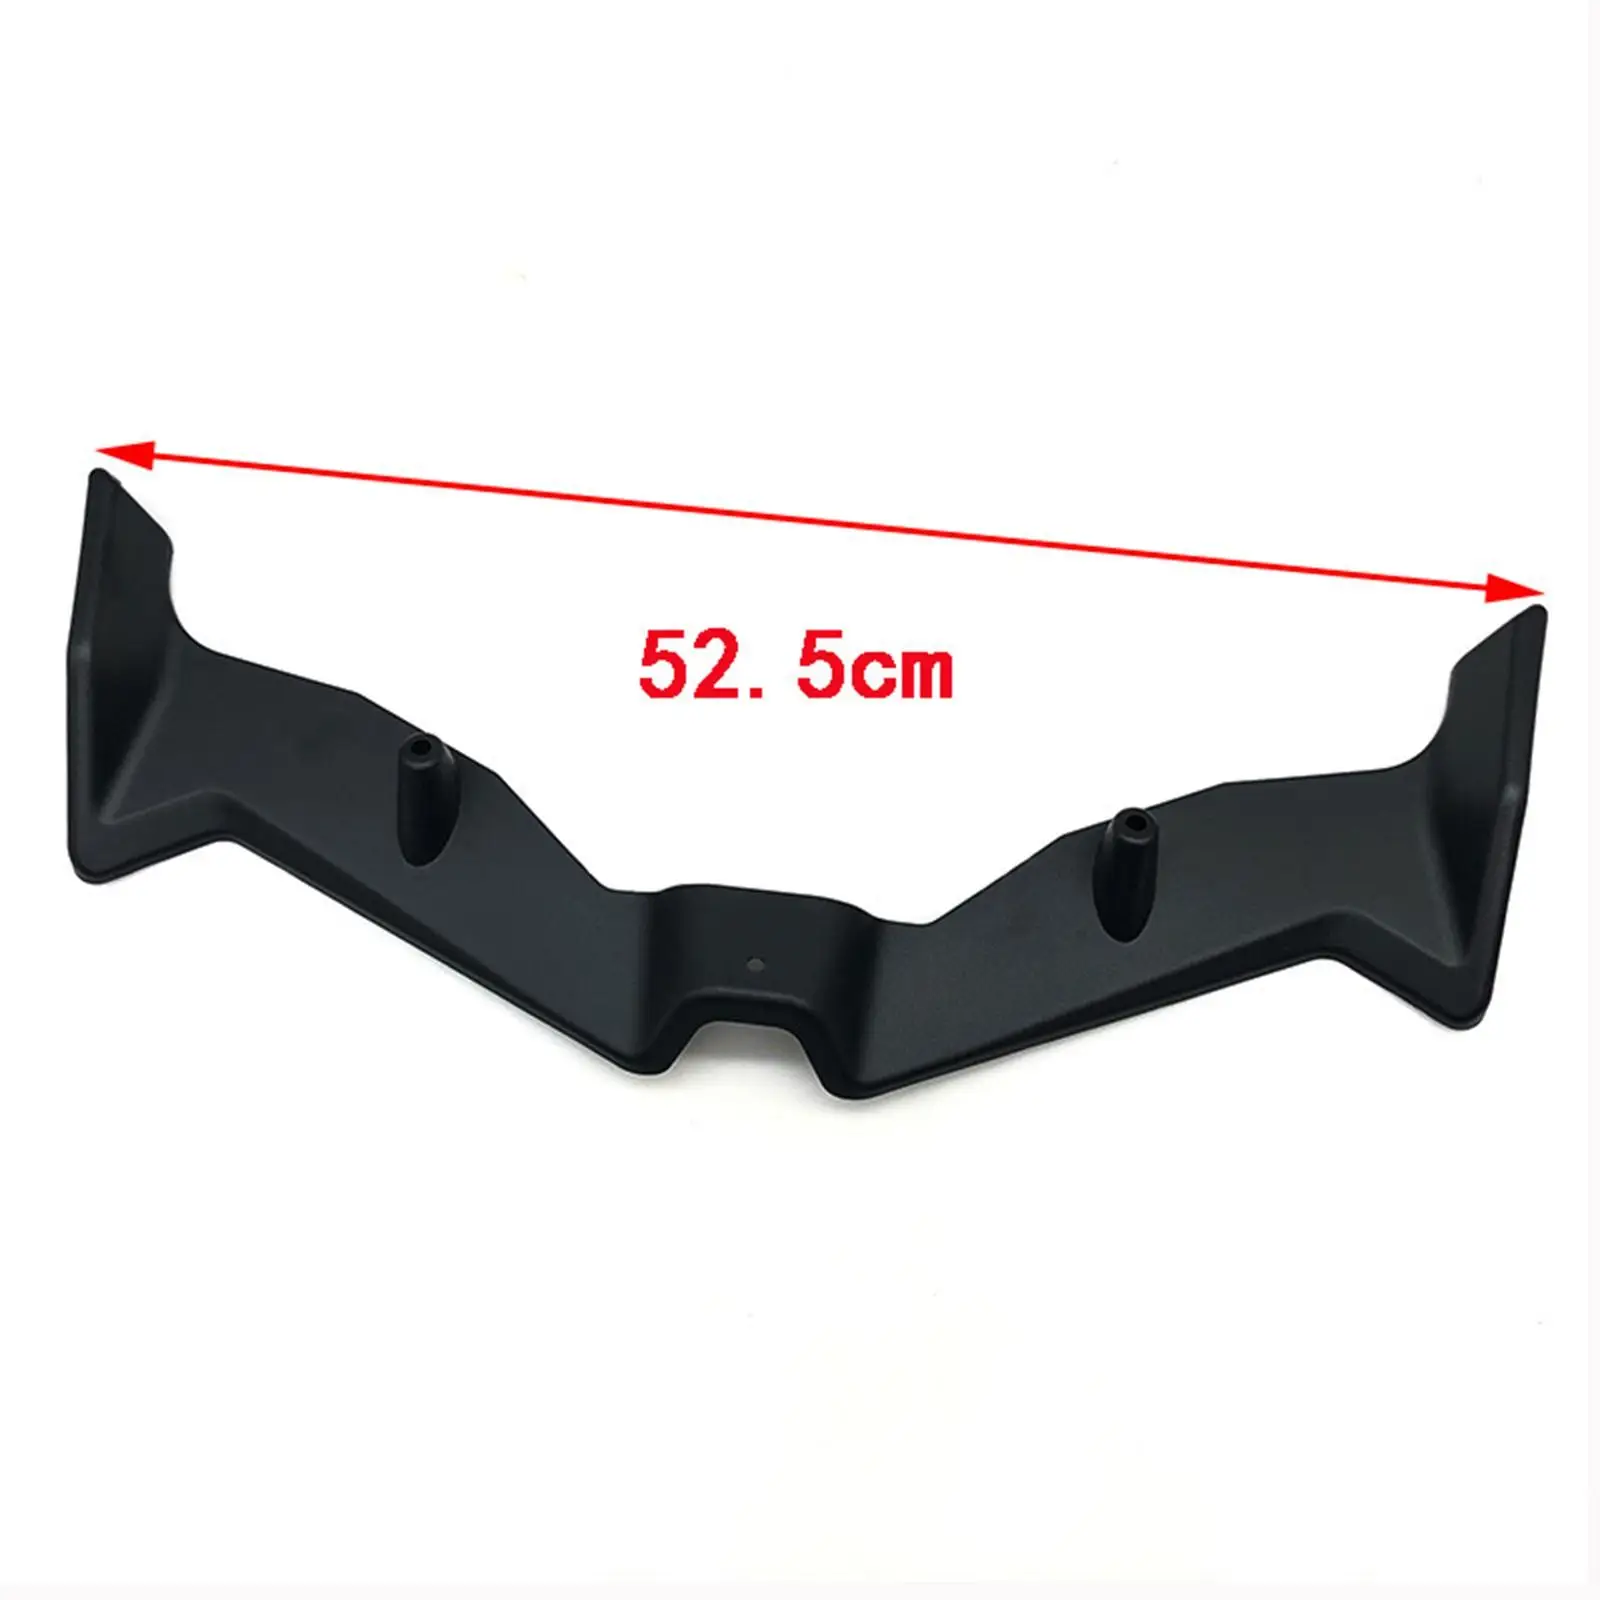 

Front Aerodynamic Winglet Windshield Guard Sturdy Professional for Honda Pcx125 Pcx160 Vehicle Repair Parts Easily Install